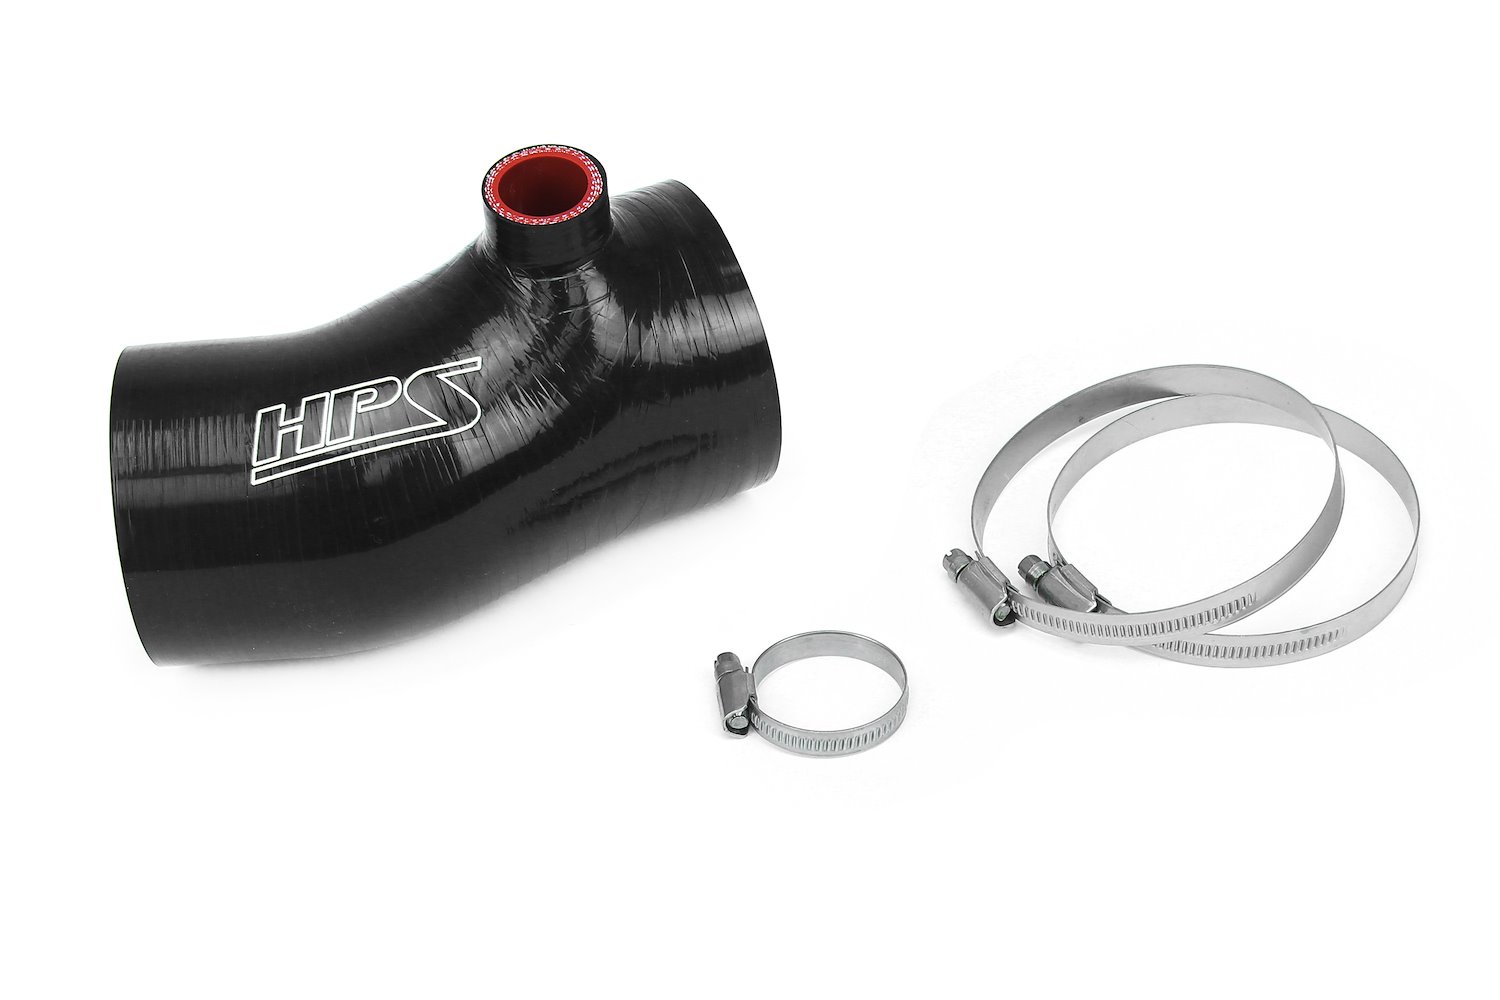 57-1880-BLK Silicone Air Intake Kit, Replace Damaged Or Restrictive Stock Air Intake, Improve Throttle Response